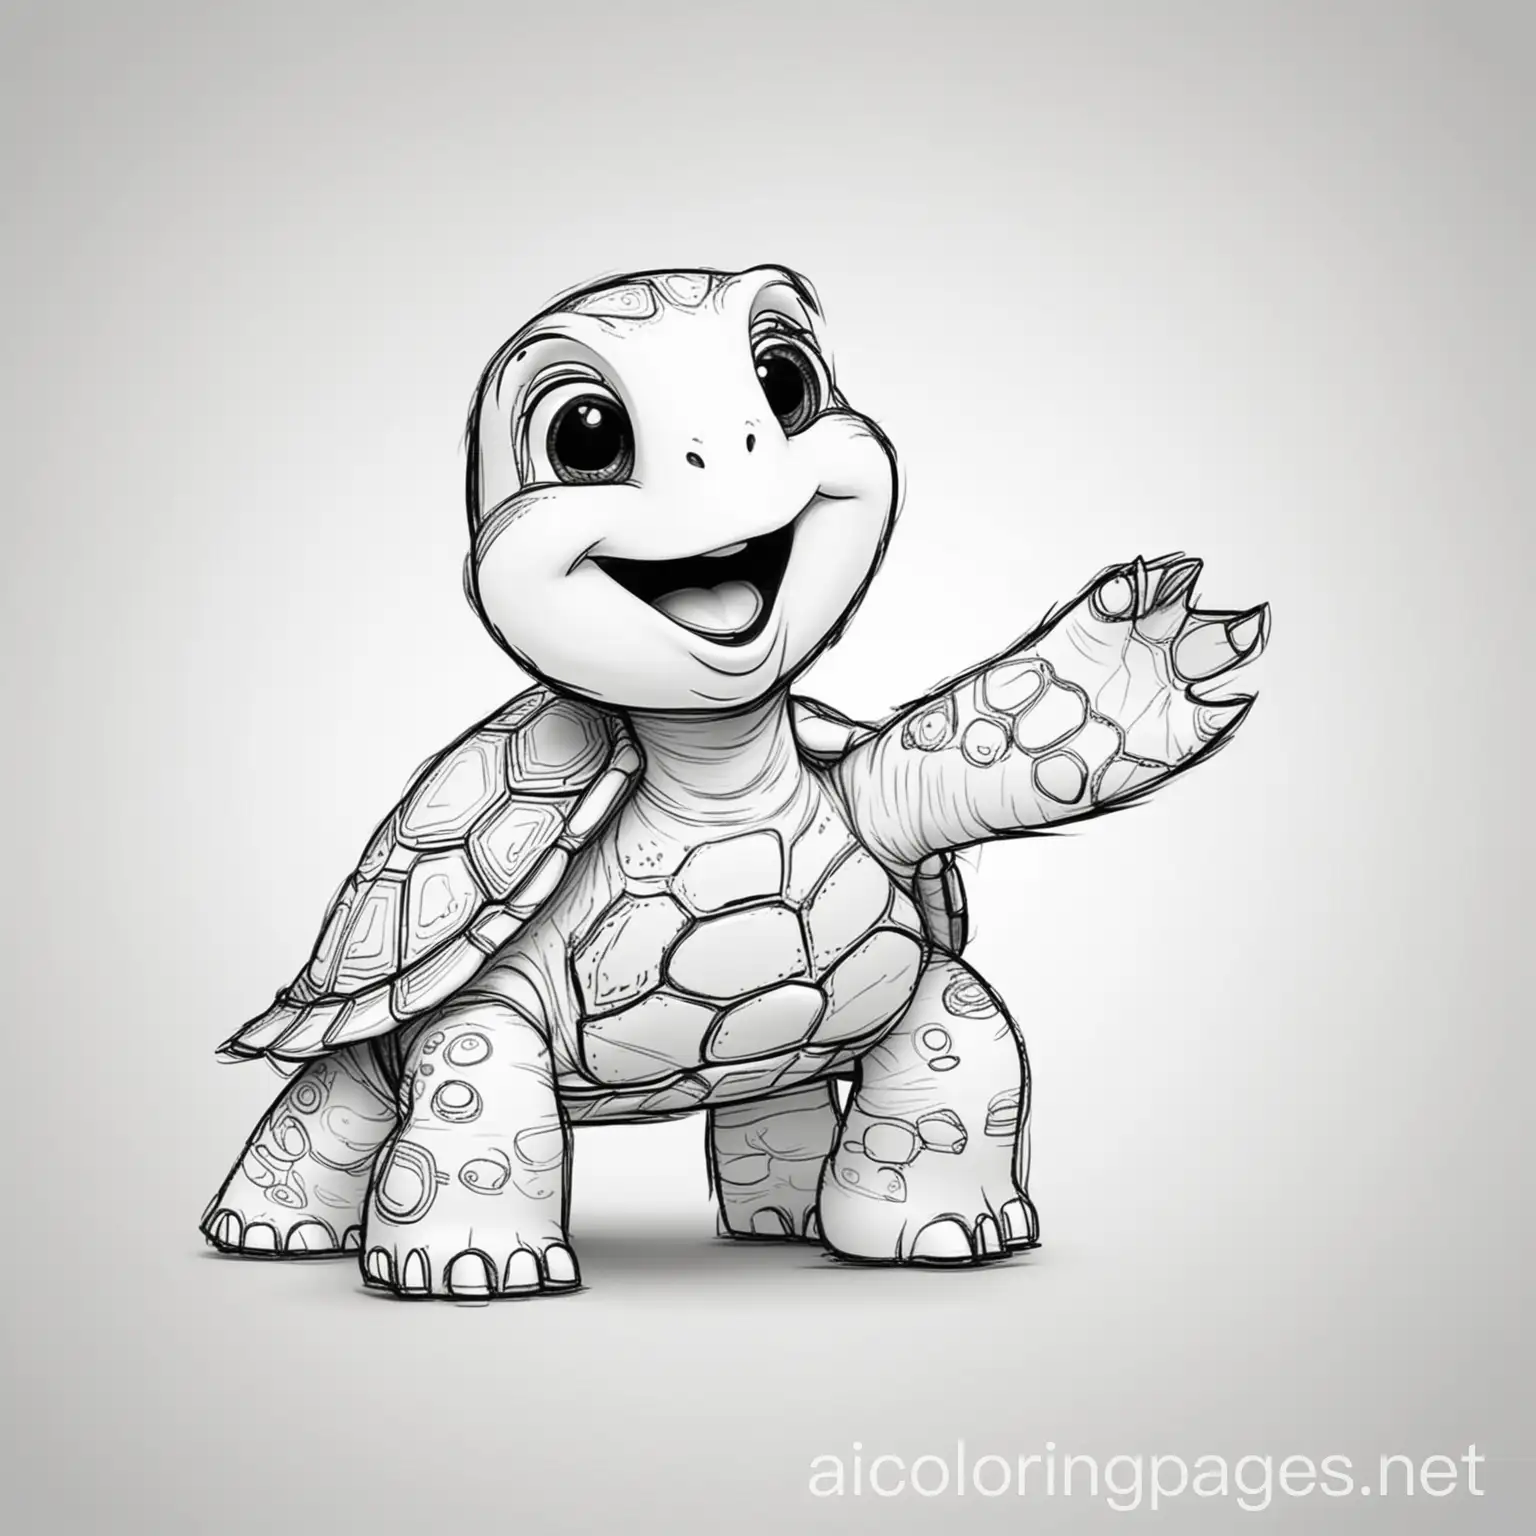 happy funny cartoon  turtle  
, Coloring Page, black and white, line art, white background, Simplicity, Ample White Space. The background of the coloring page is plain white to make it easy for young children to color within the lines. The outlines of all the subjects are easy to distinguish, making it simple for kids to color without too much difficulty